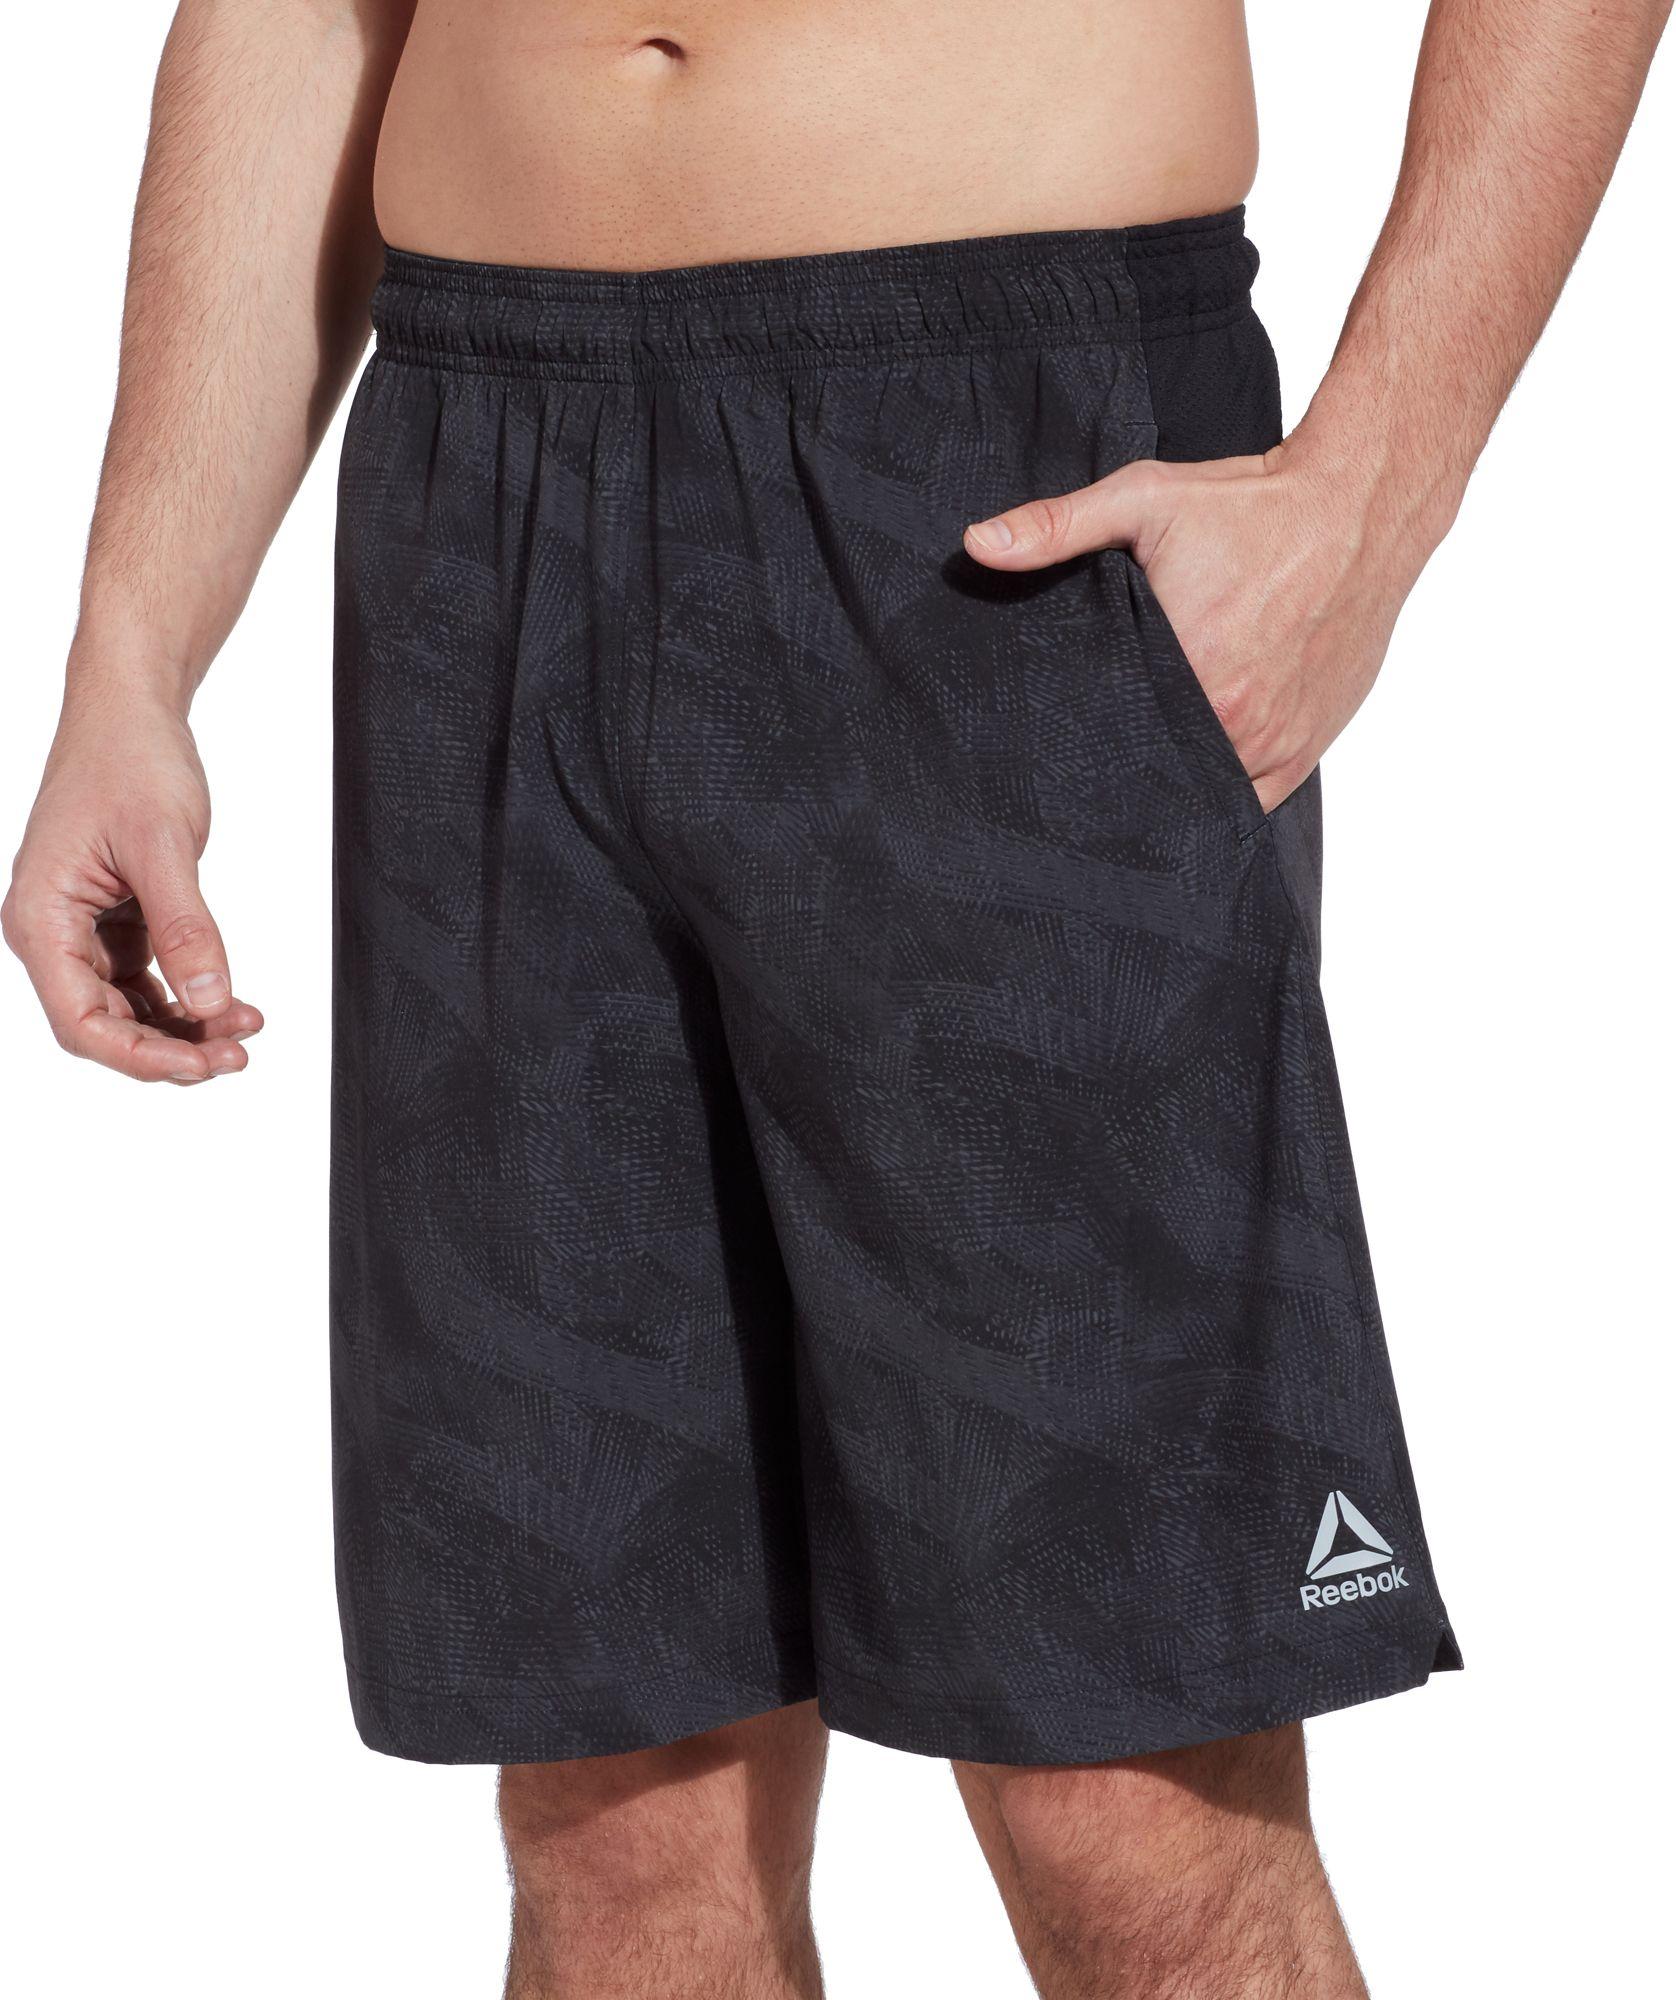 Reebok Printed Woven Shorts in Black for Men - Lyst